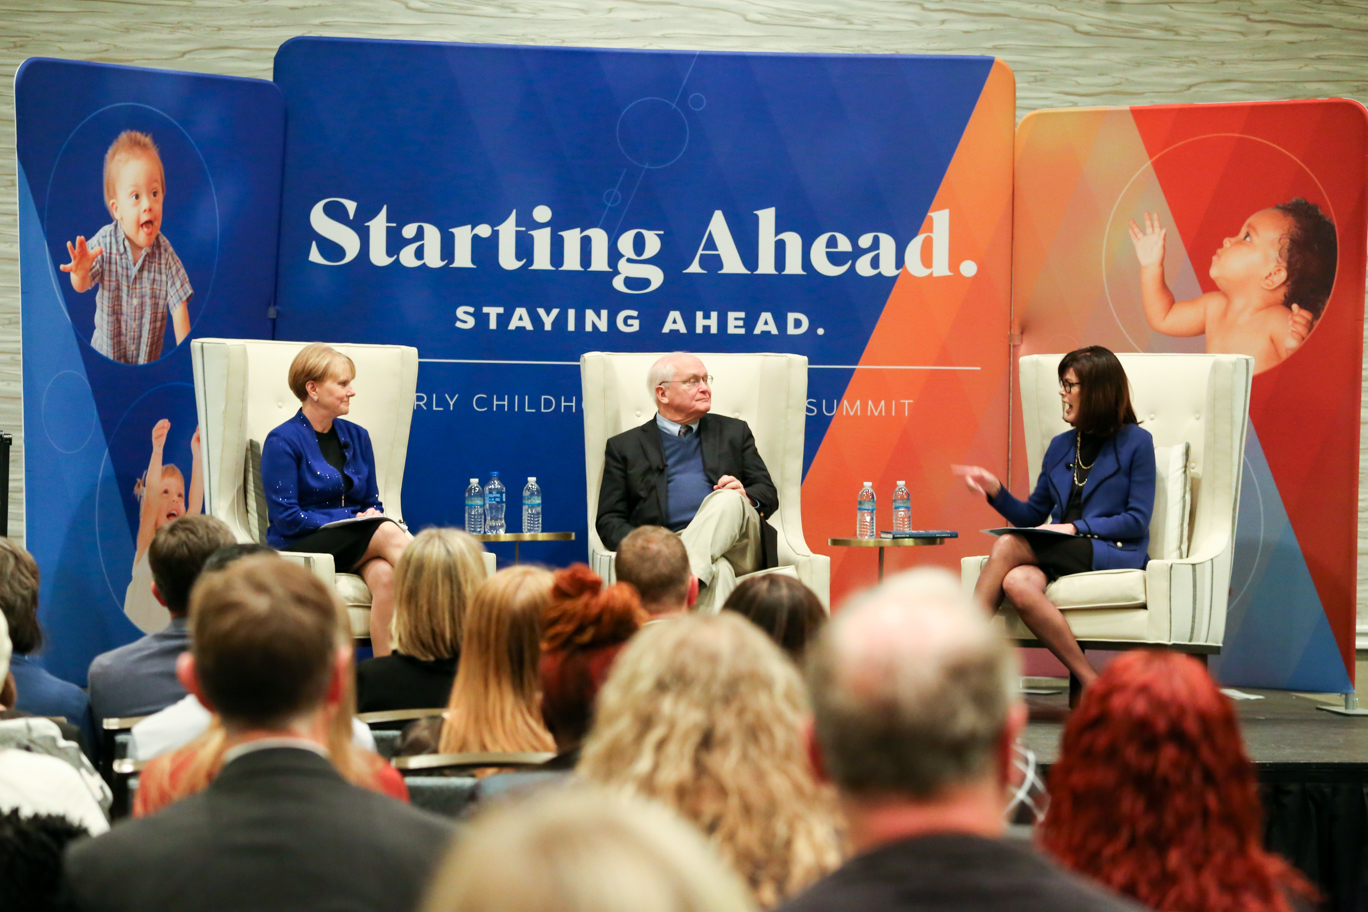 Patricia Snyder, David Lawrence, Jr., and Diane McFarlin sitting on a stage discussing important matters.